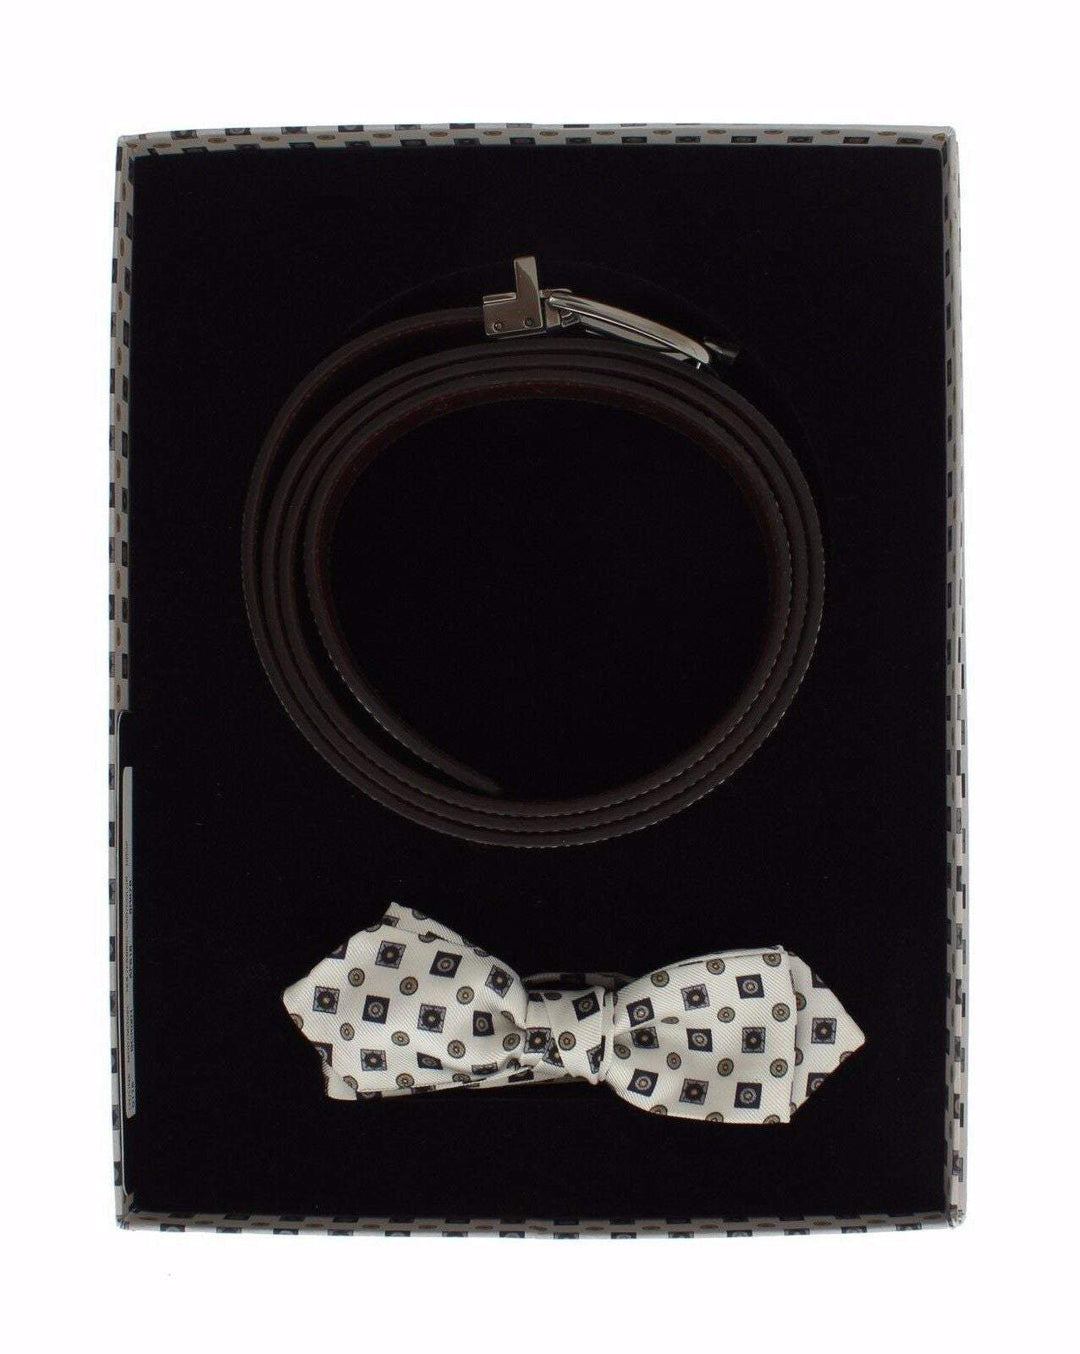 Dolce & Gabbana White Silk Bowtie Leather Men Belt Gift Box #men, 115 cm / 46 Inches, Accessories - New Arrivals, Belts - Men - Accessories, Dolce & Gabbana, feed-agegroup-adult, feed-color-white, feed-gender-male, Ties & Bowties - Men - Accessories, White at SEYMAYKA